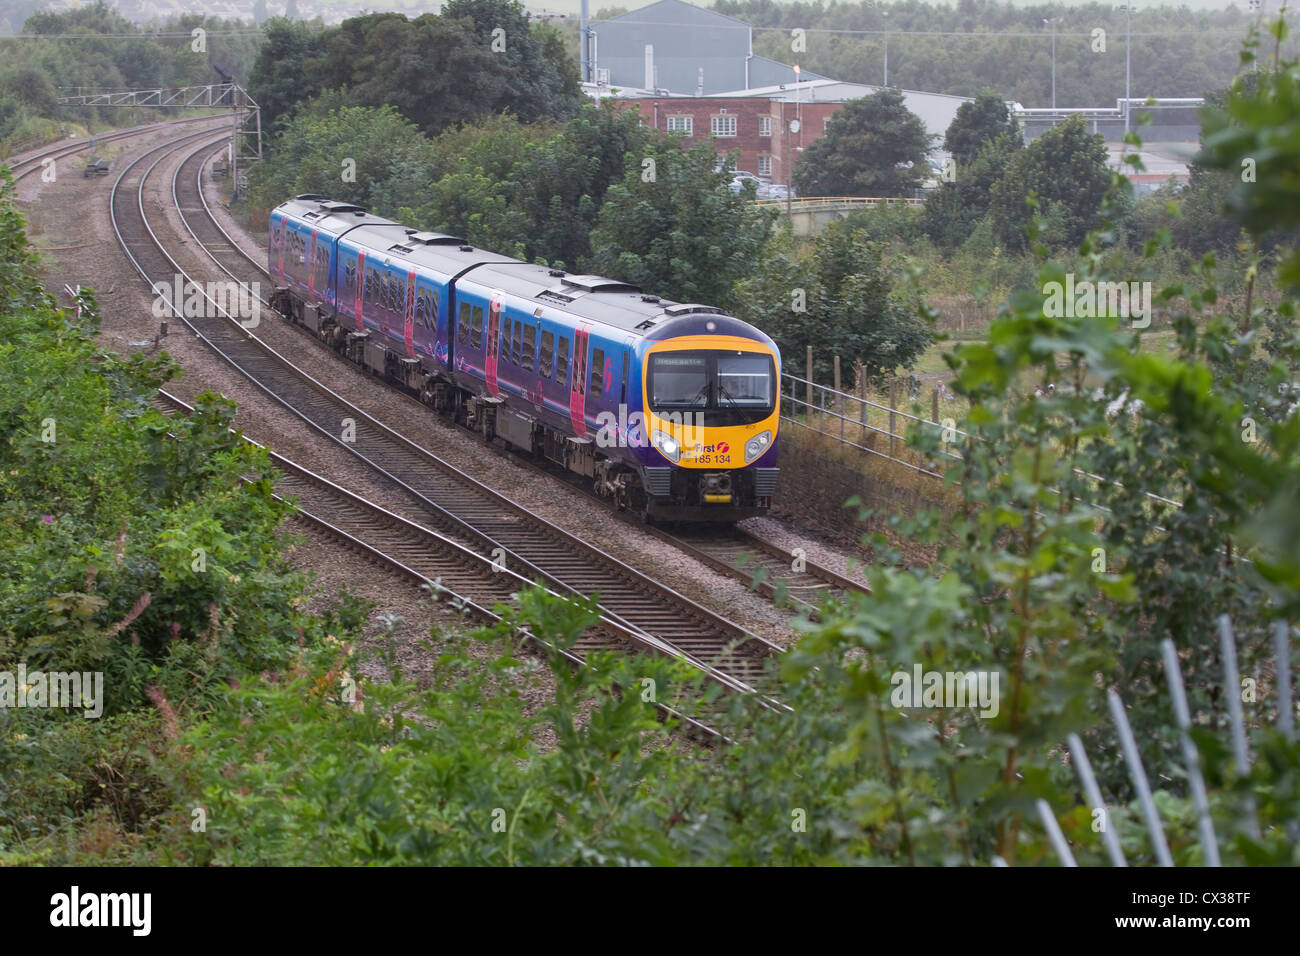 British First Trans Pennine Express train DMU 185 134 heading eastwards through Mirfield en route to Newcastle Stock Photo